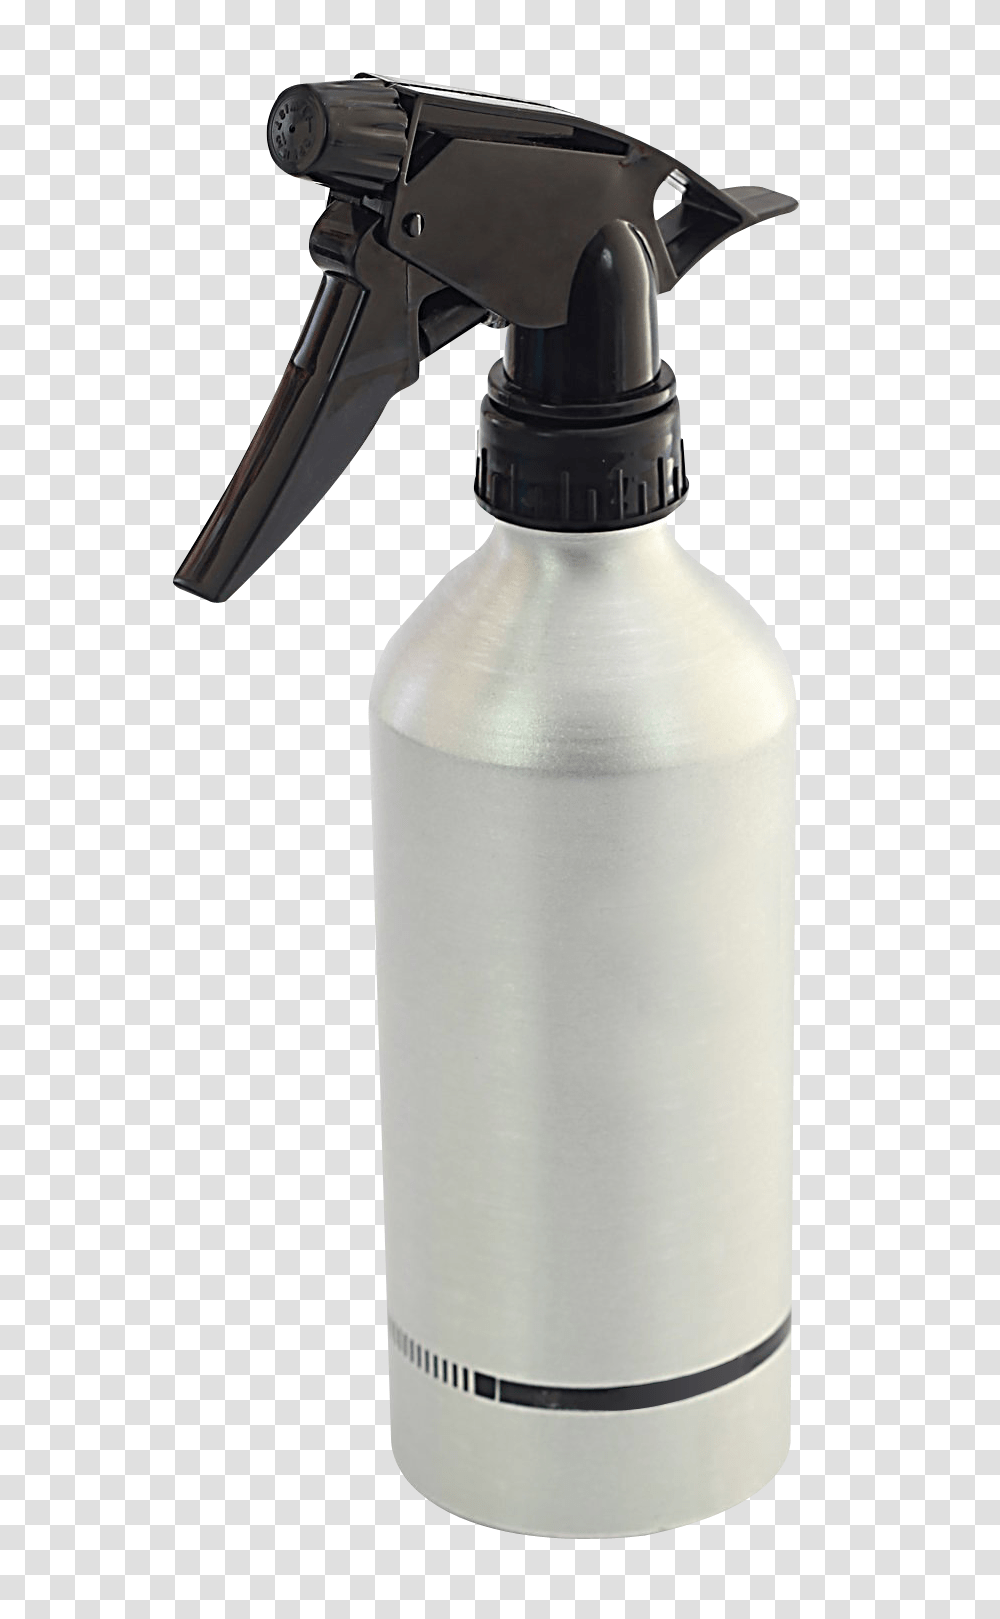 Spray Bottle Image, Shaker, Can, Tin, Spray Can Transparent Png